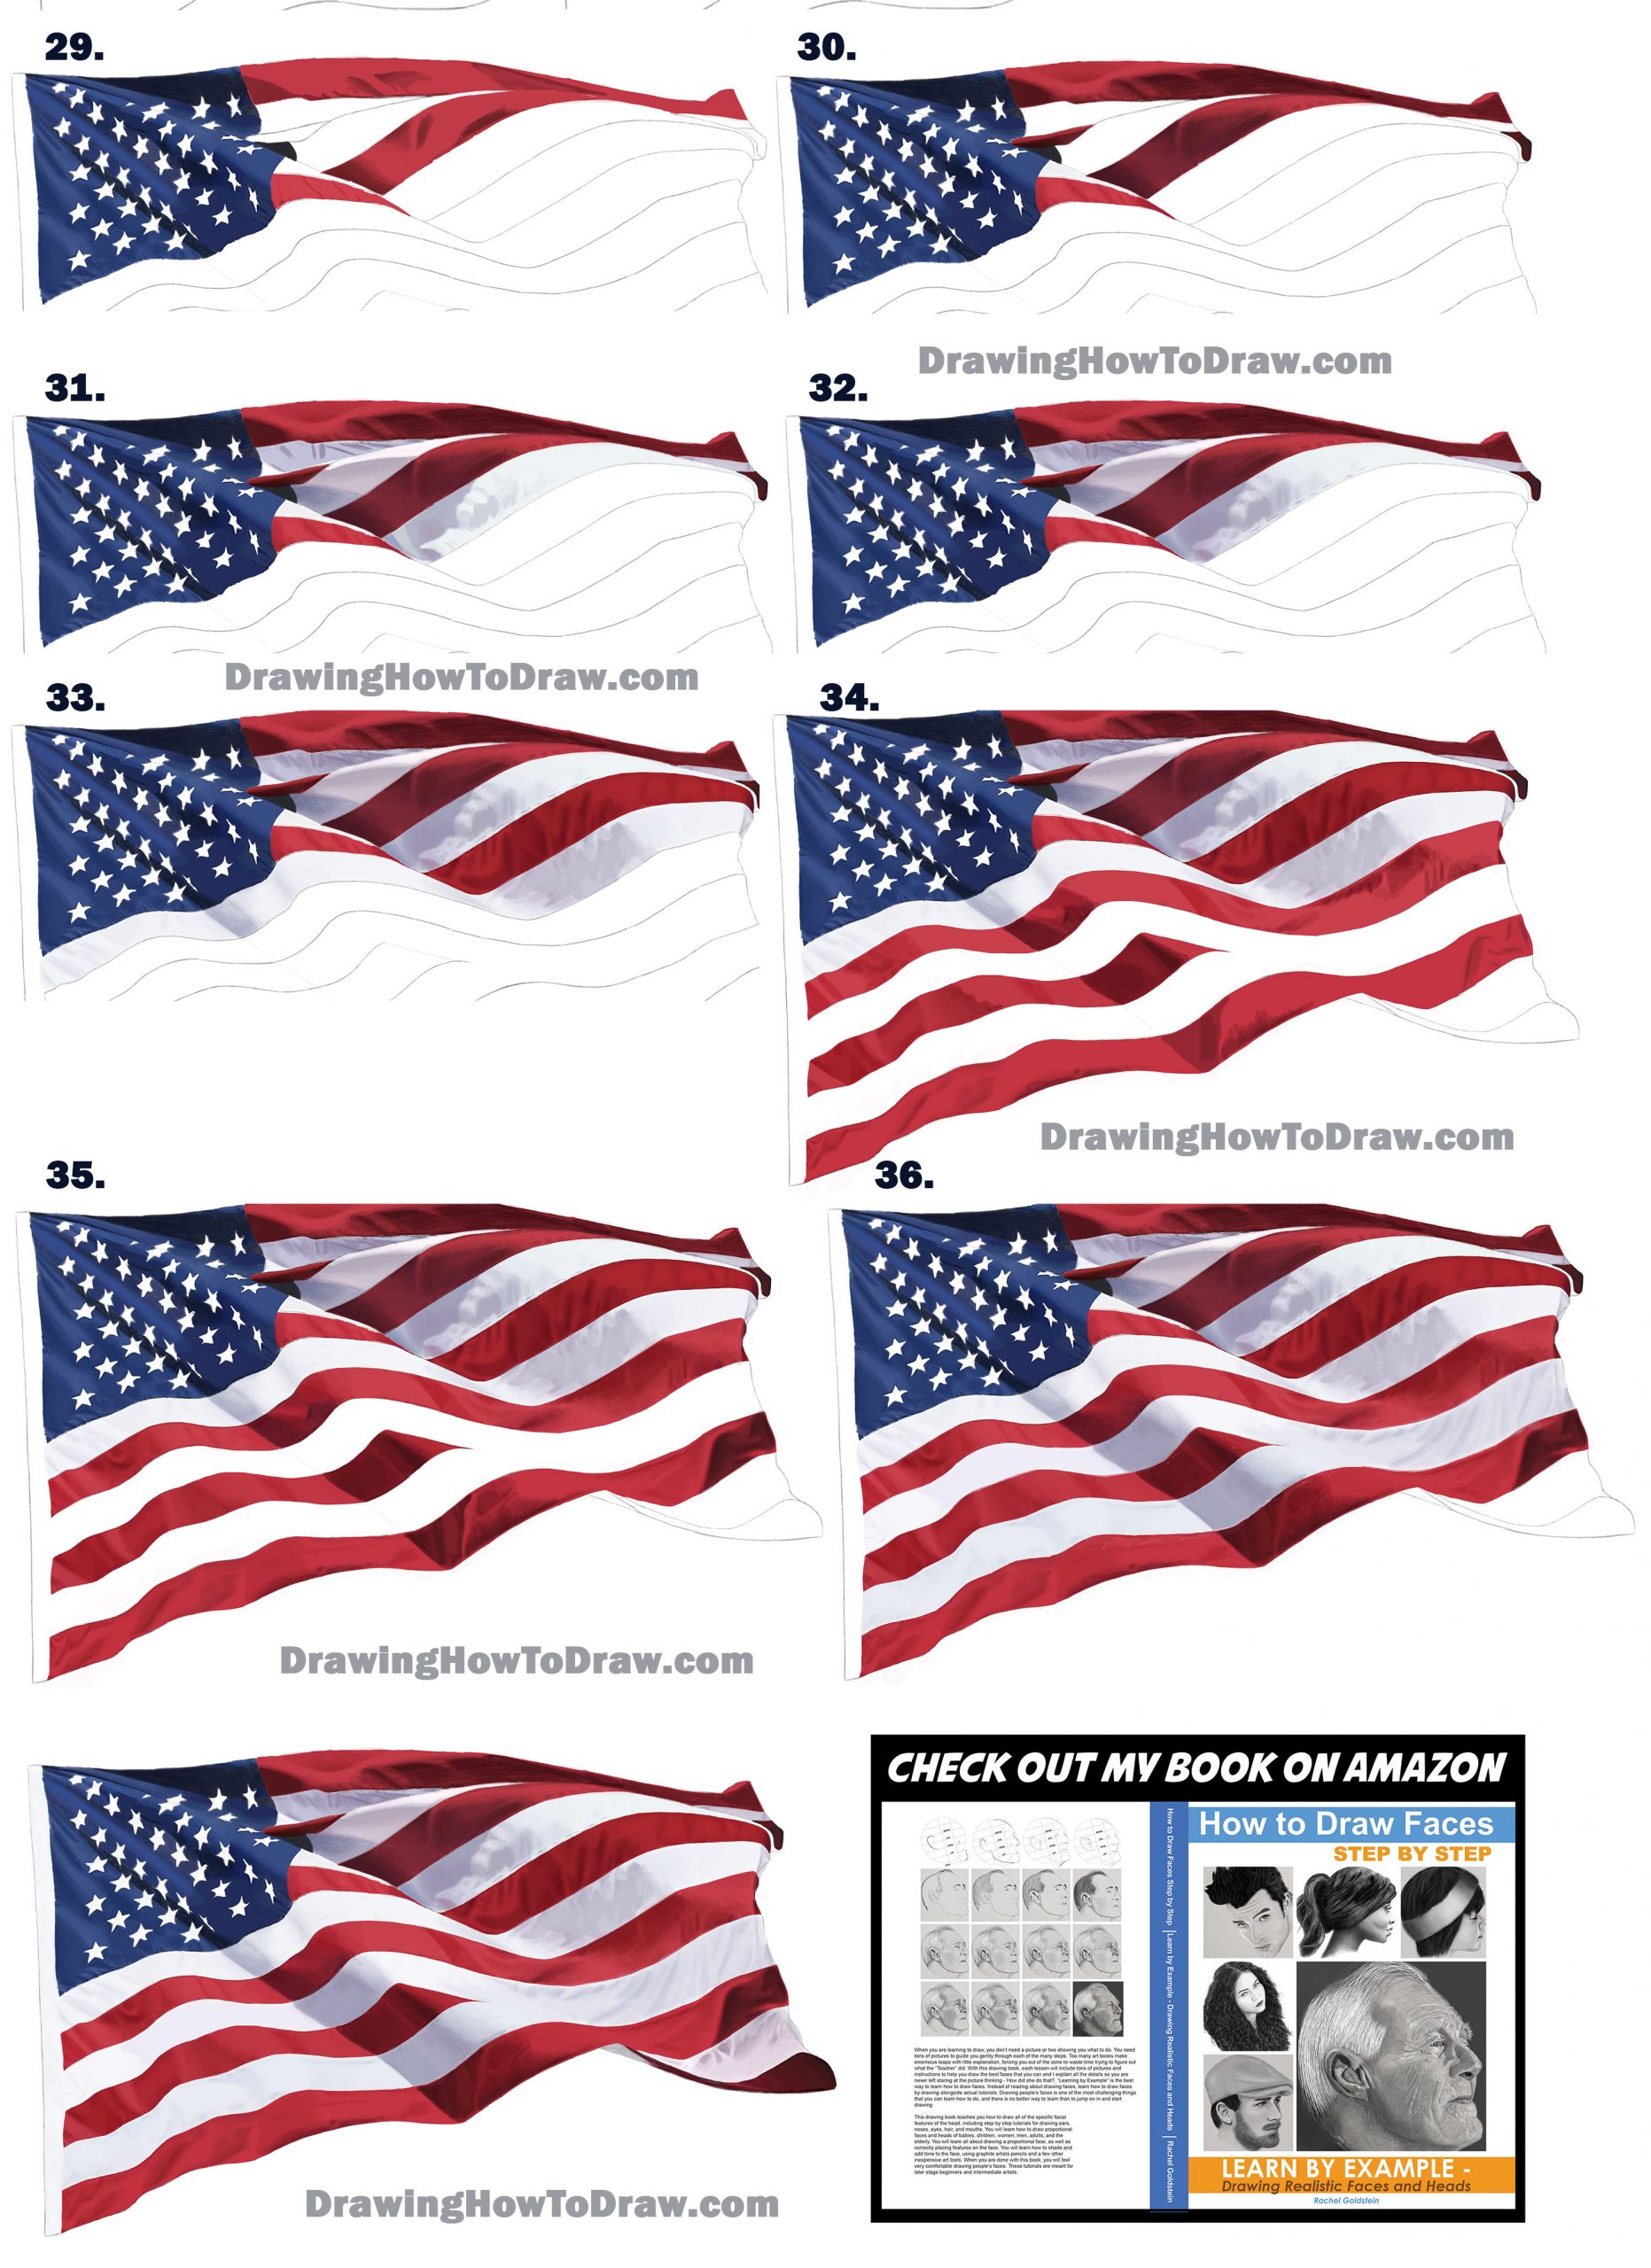 Learn How to Draw a Realistic US Flag / American Flag - Step by Step Drawing Tutorial